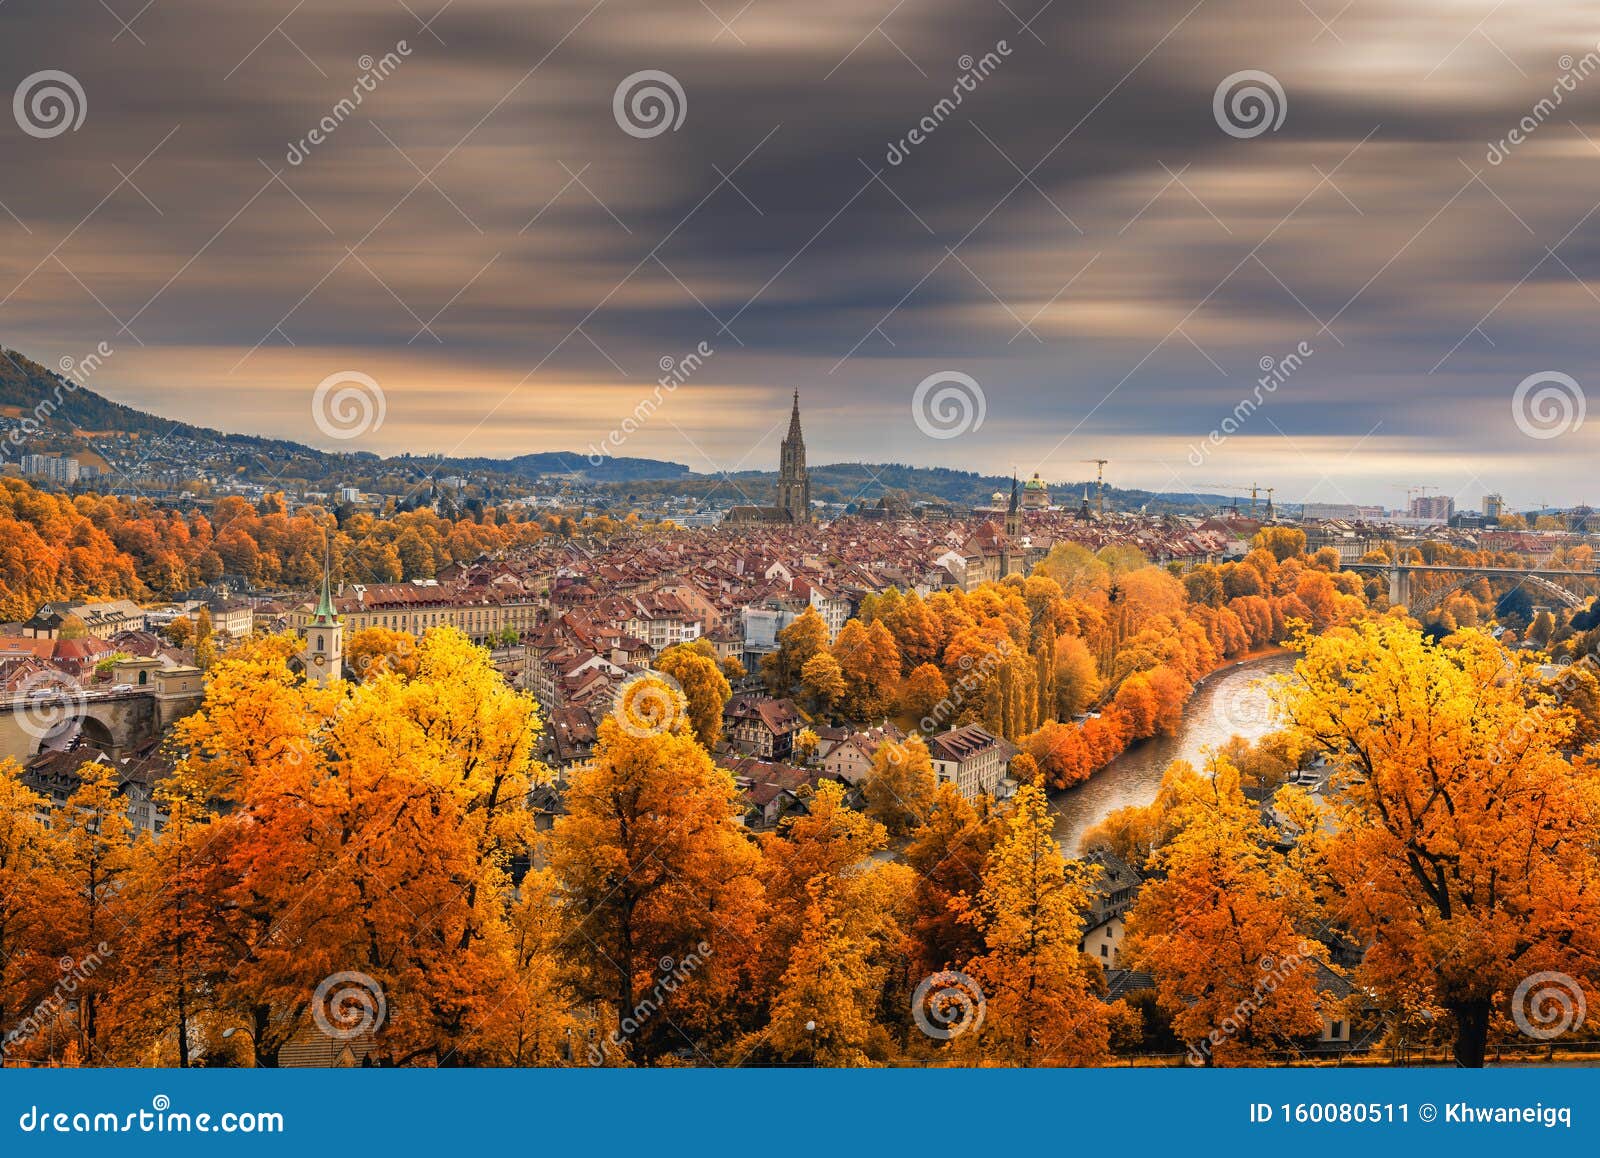 cityscape historical architecture building of bern at autumn season, switzerland, capital city landscape scenery and historic town